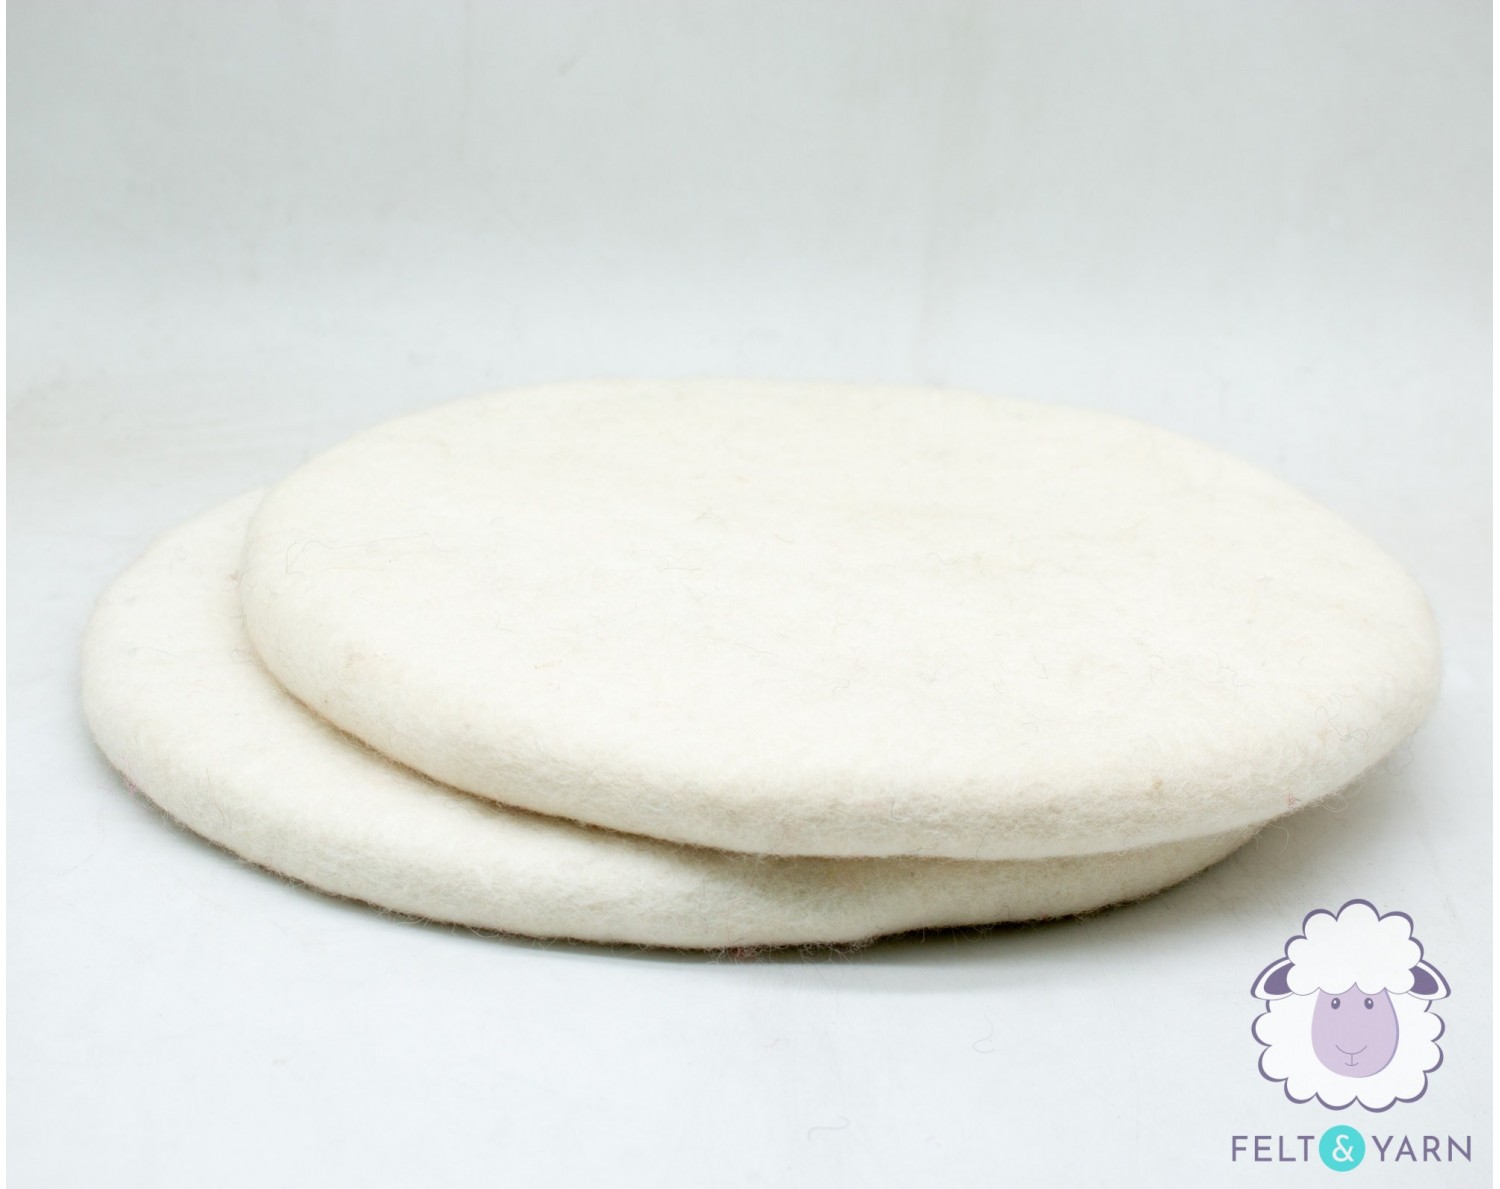 Felted Ball Chair Pad Wool Felted Seat Pad Gifts Round Ball Chair Pad 35 CM From Nepal Multi Color Chair Mat